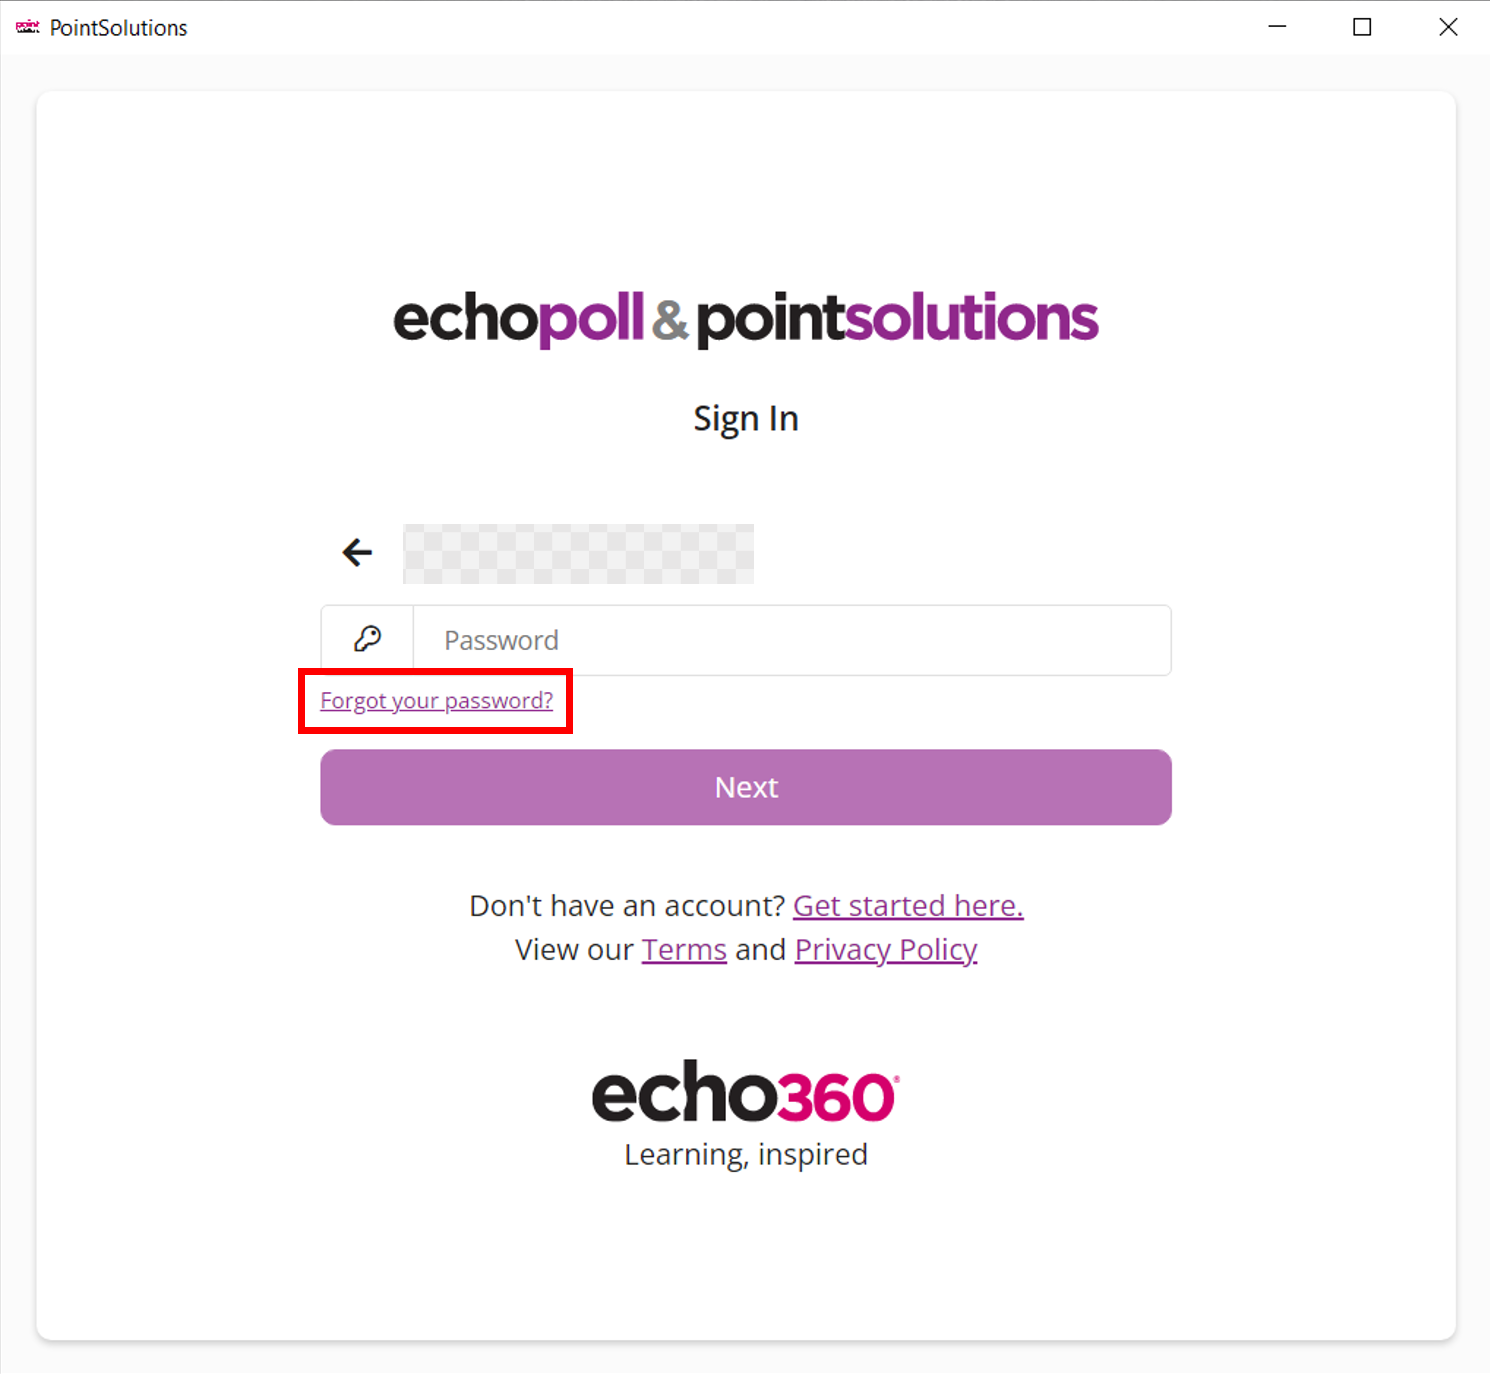 PointSolutions Desktop Sign In screen showing empty password field and Forgot your password link identified